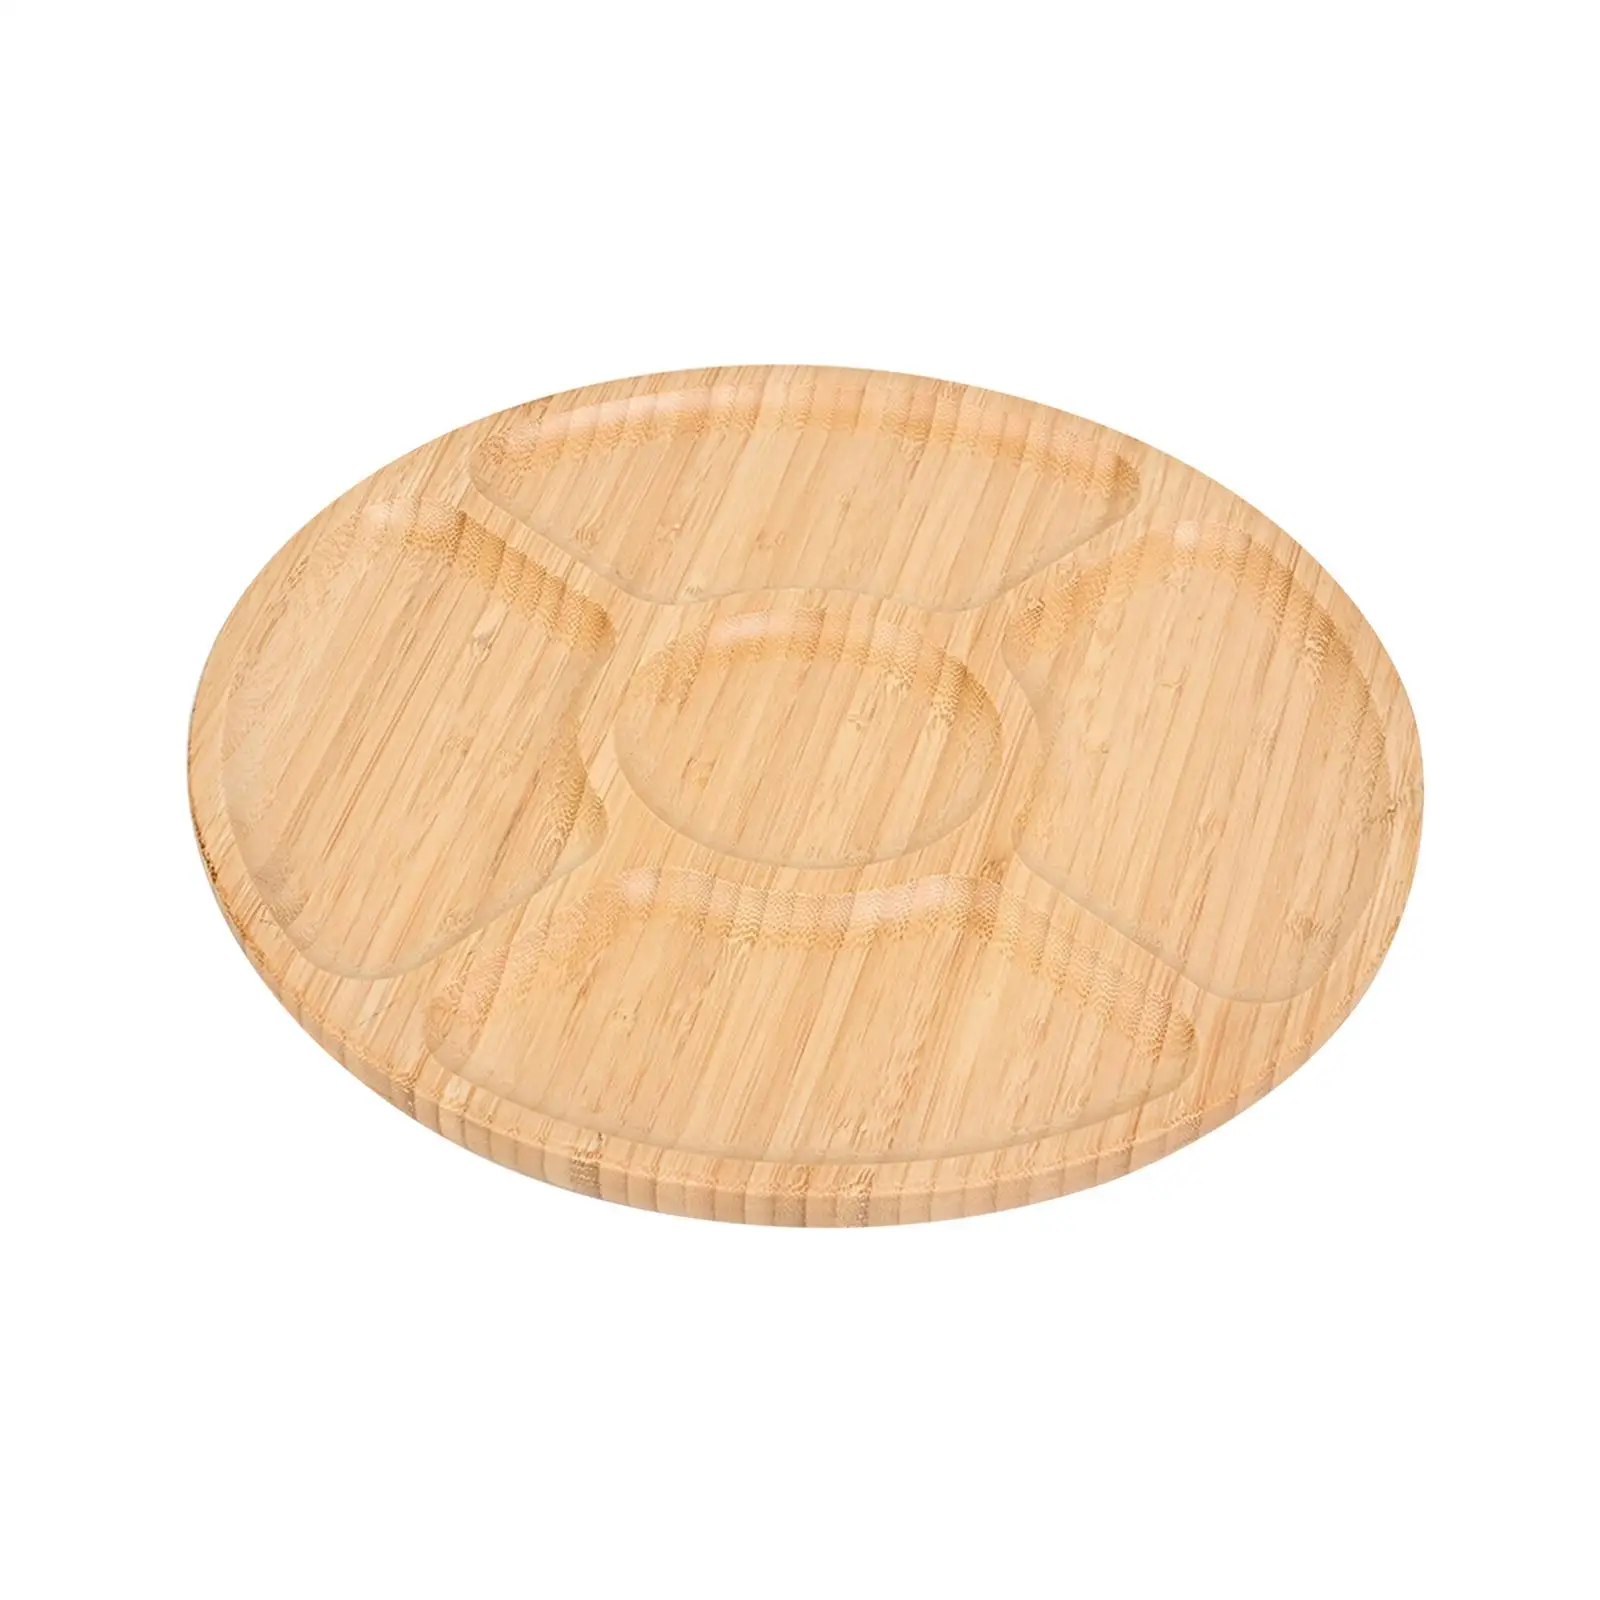 Wooden Tray Round Tray Wooden Food Tray Fruit Plate for Cheese Bread Pastry Party